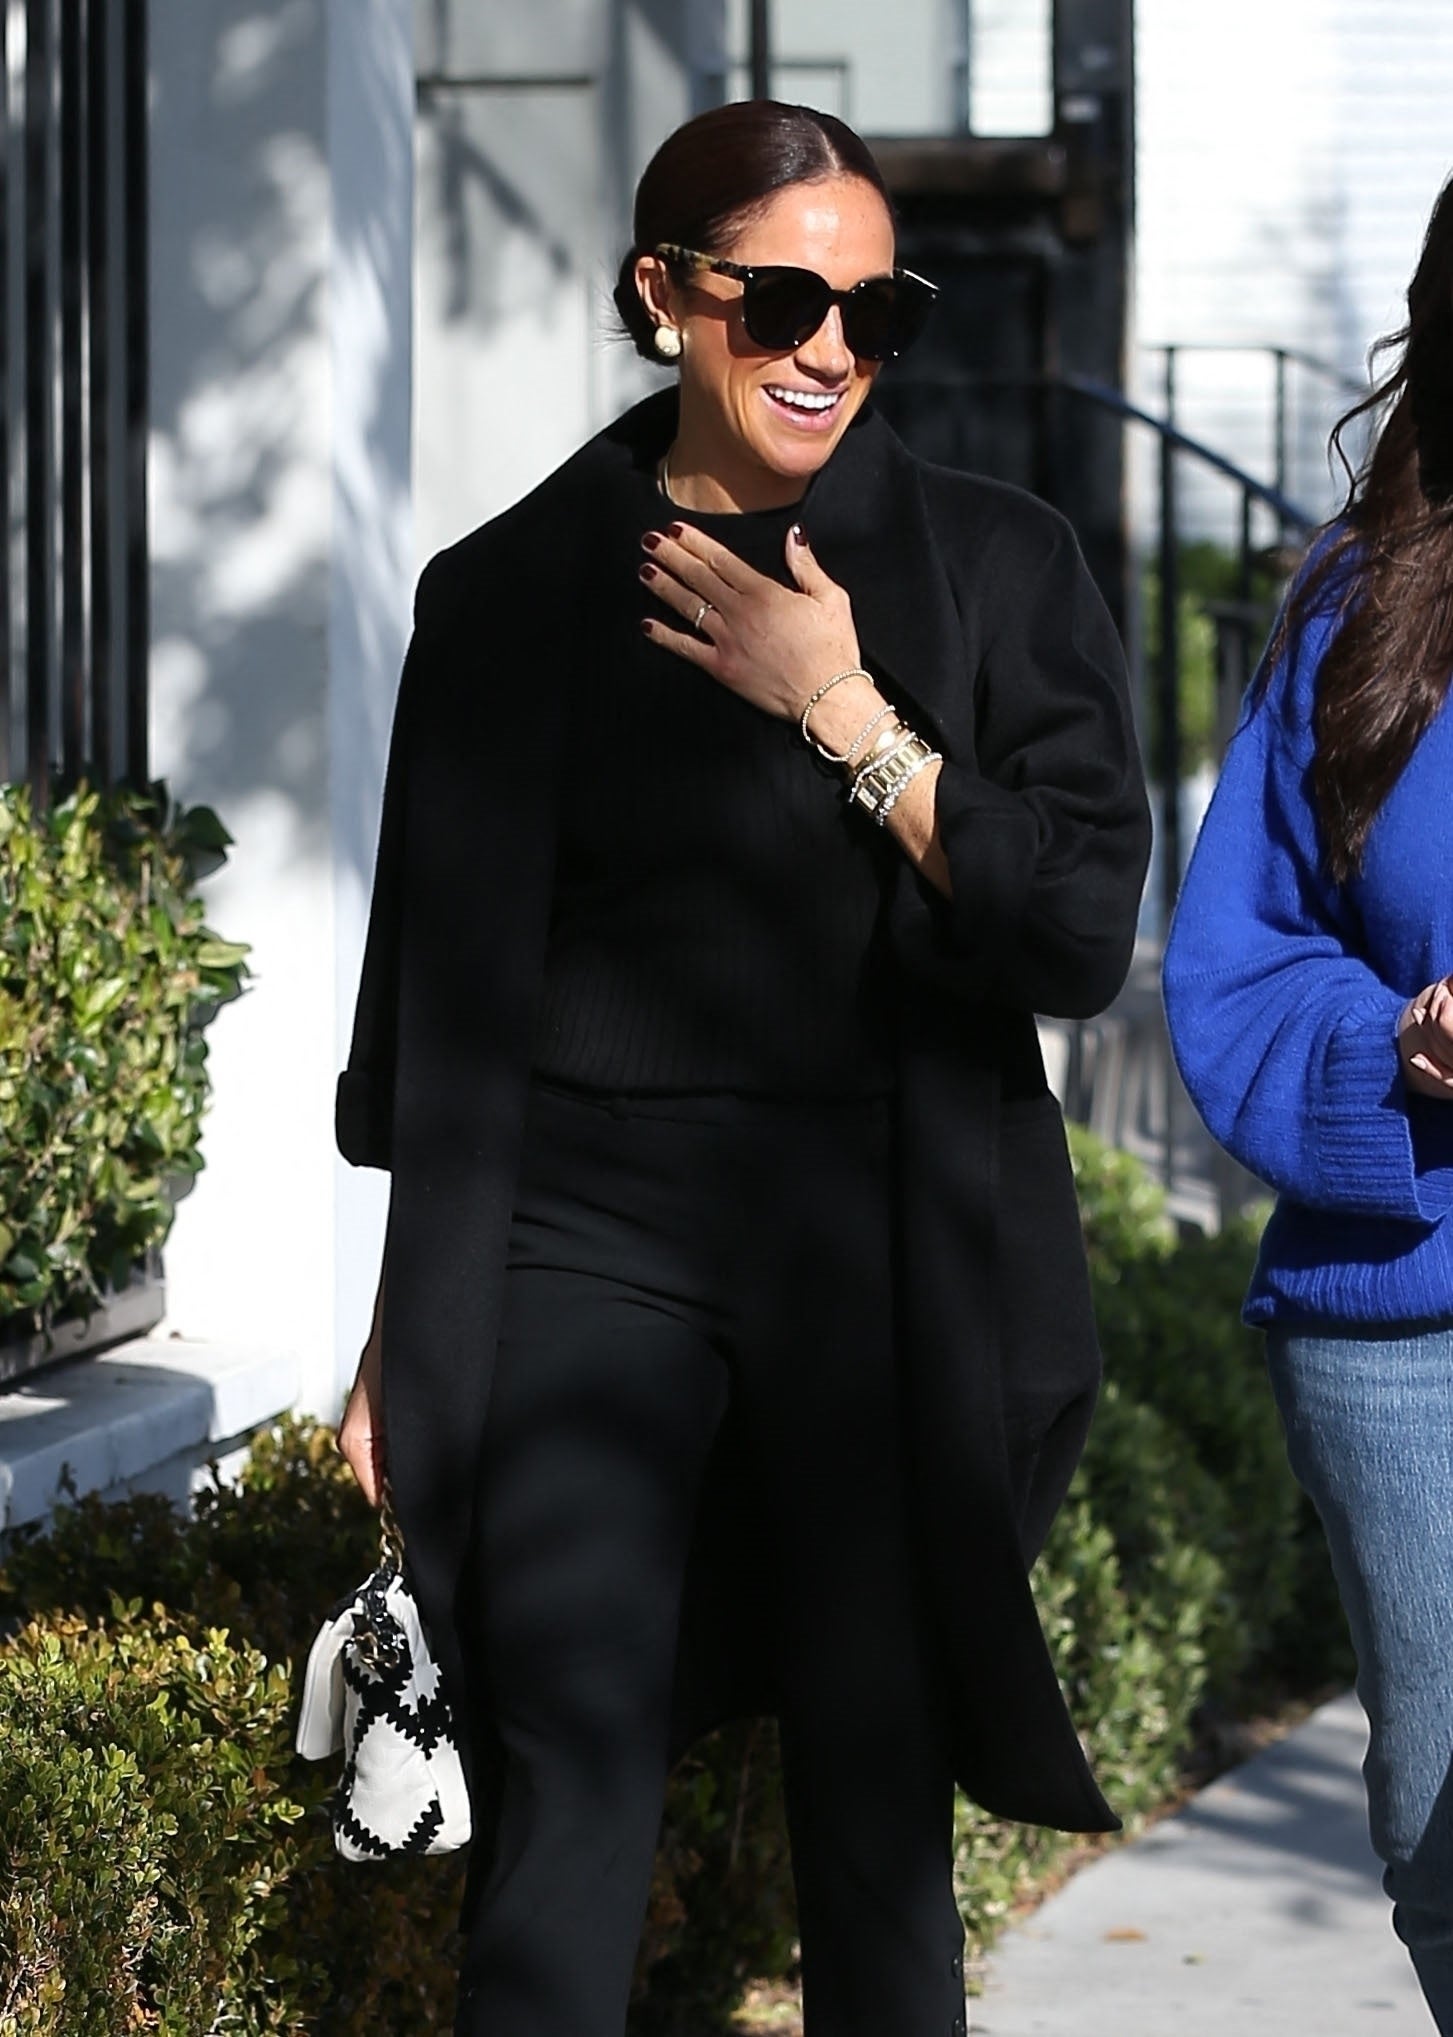 03/08/2023.Meghan Markle, Duchess of Sussex leaves Gracias Madre in West  Hollywood, California, March 8, 2023 Meghan Markle…